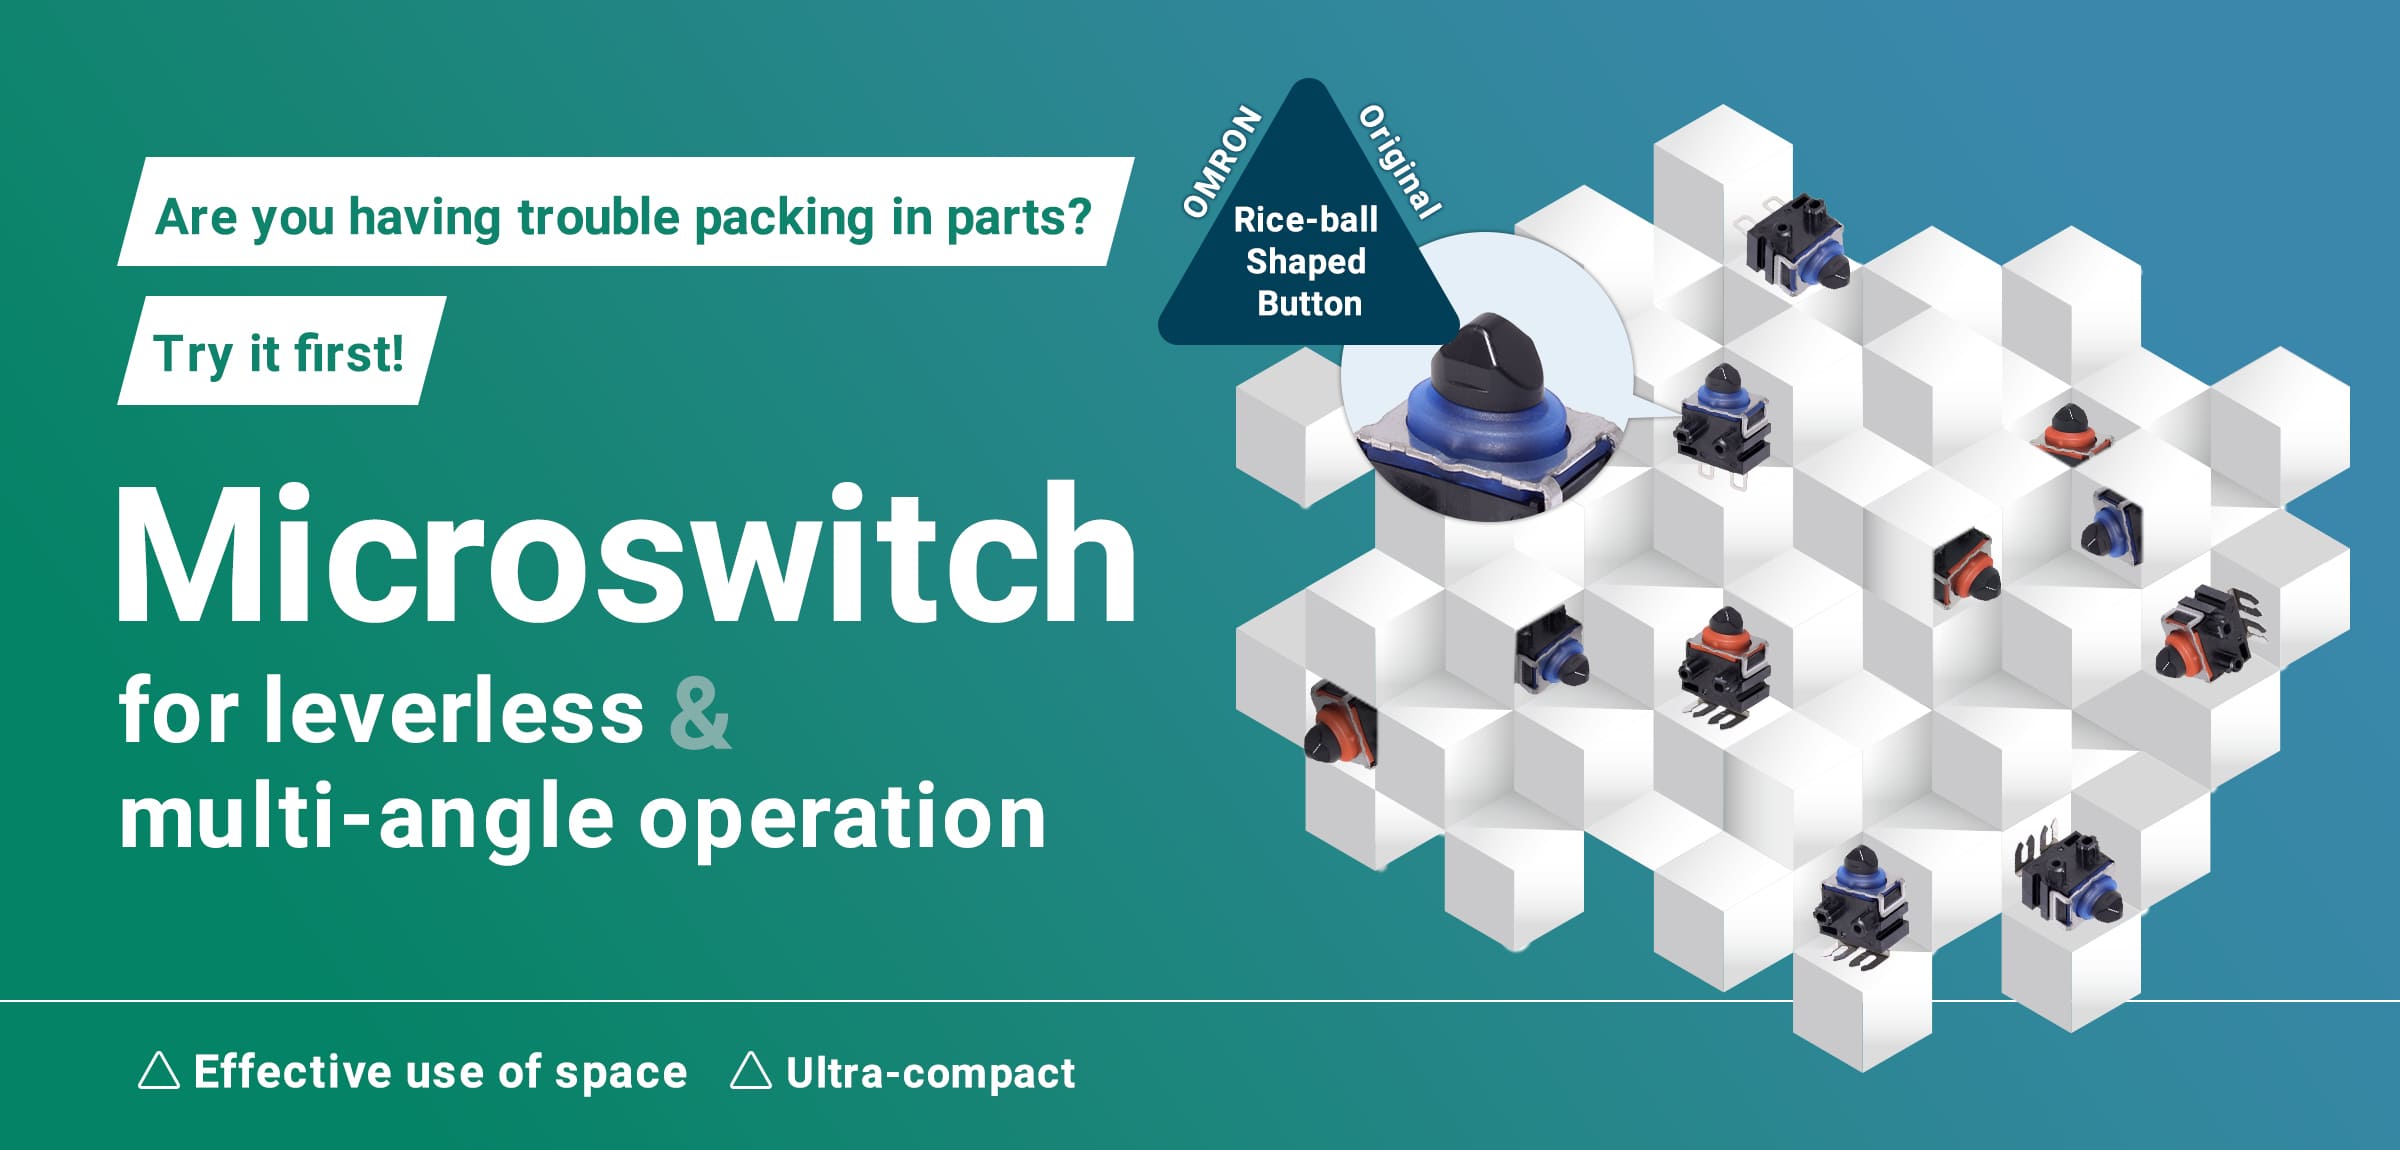 Are you having trouble packing in parts? Try it first! Microswitch for leverless & multi-angle operation (Effective use of space, Ultra-compact)